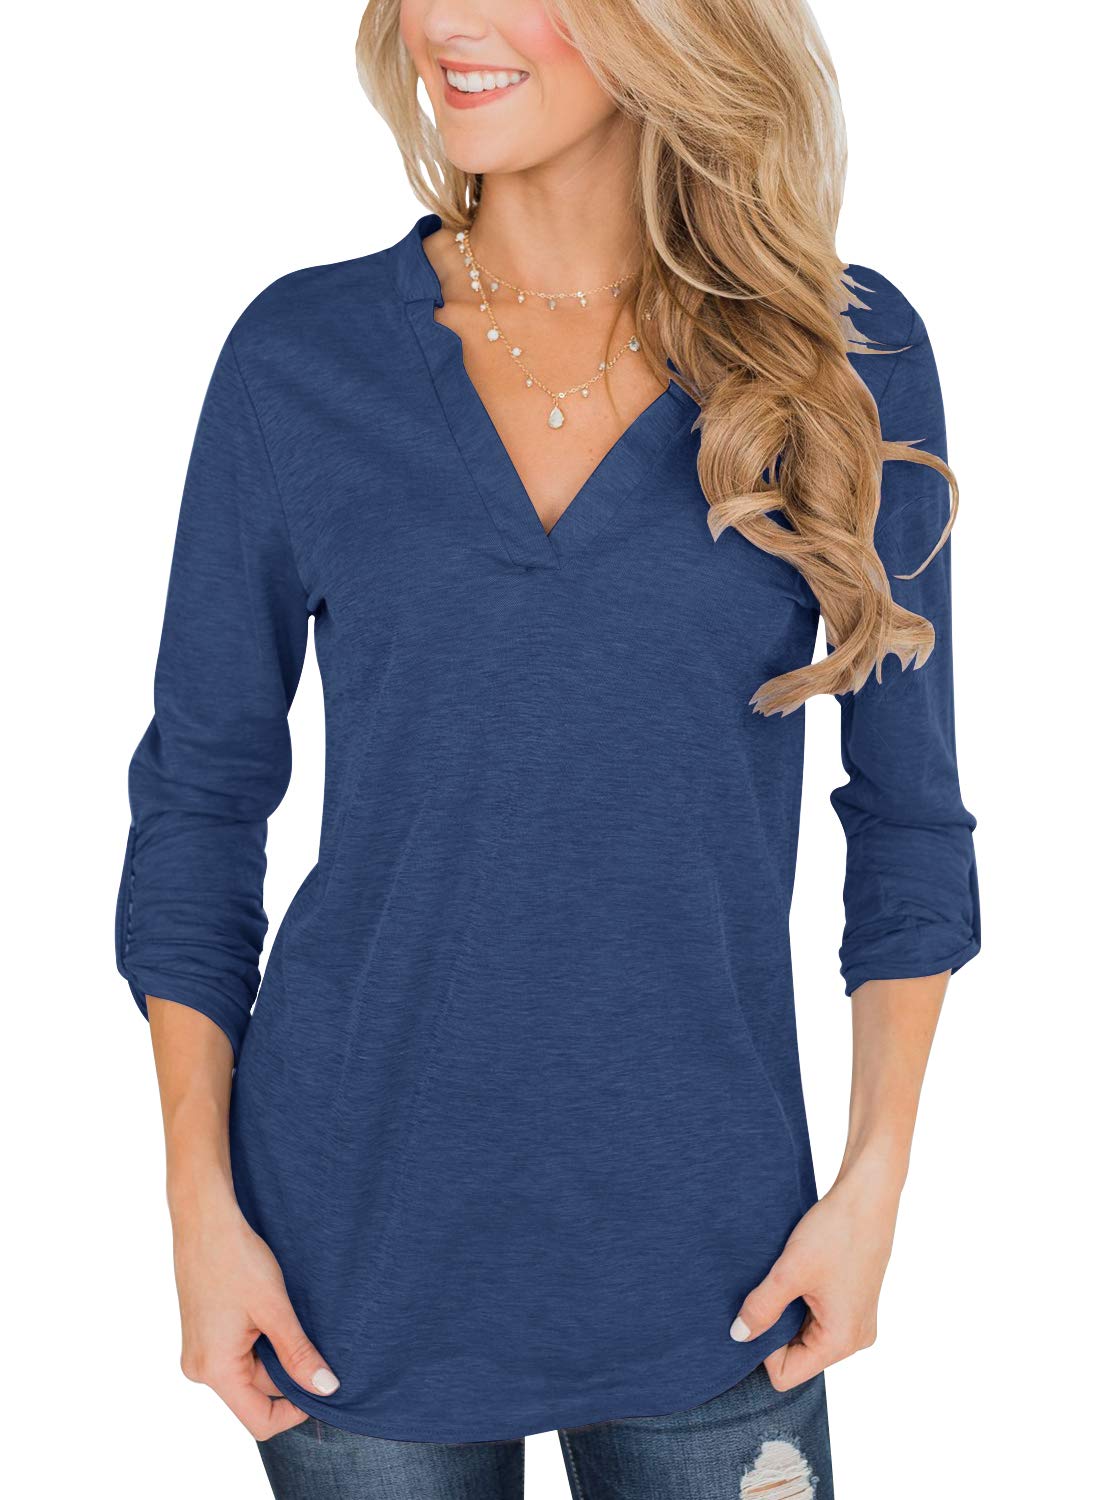 Book Cover Topstype Womens 3/4 Sleeve Tunic Tops V Neck Work Casual T Shirt Small 1-blue